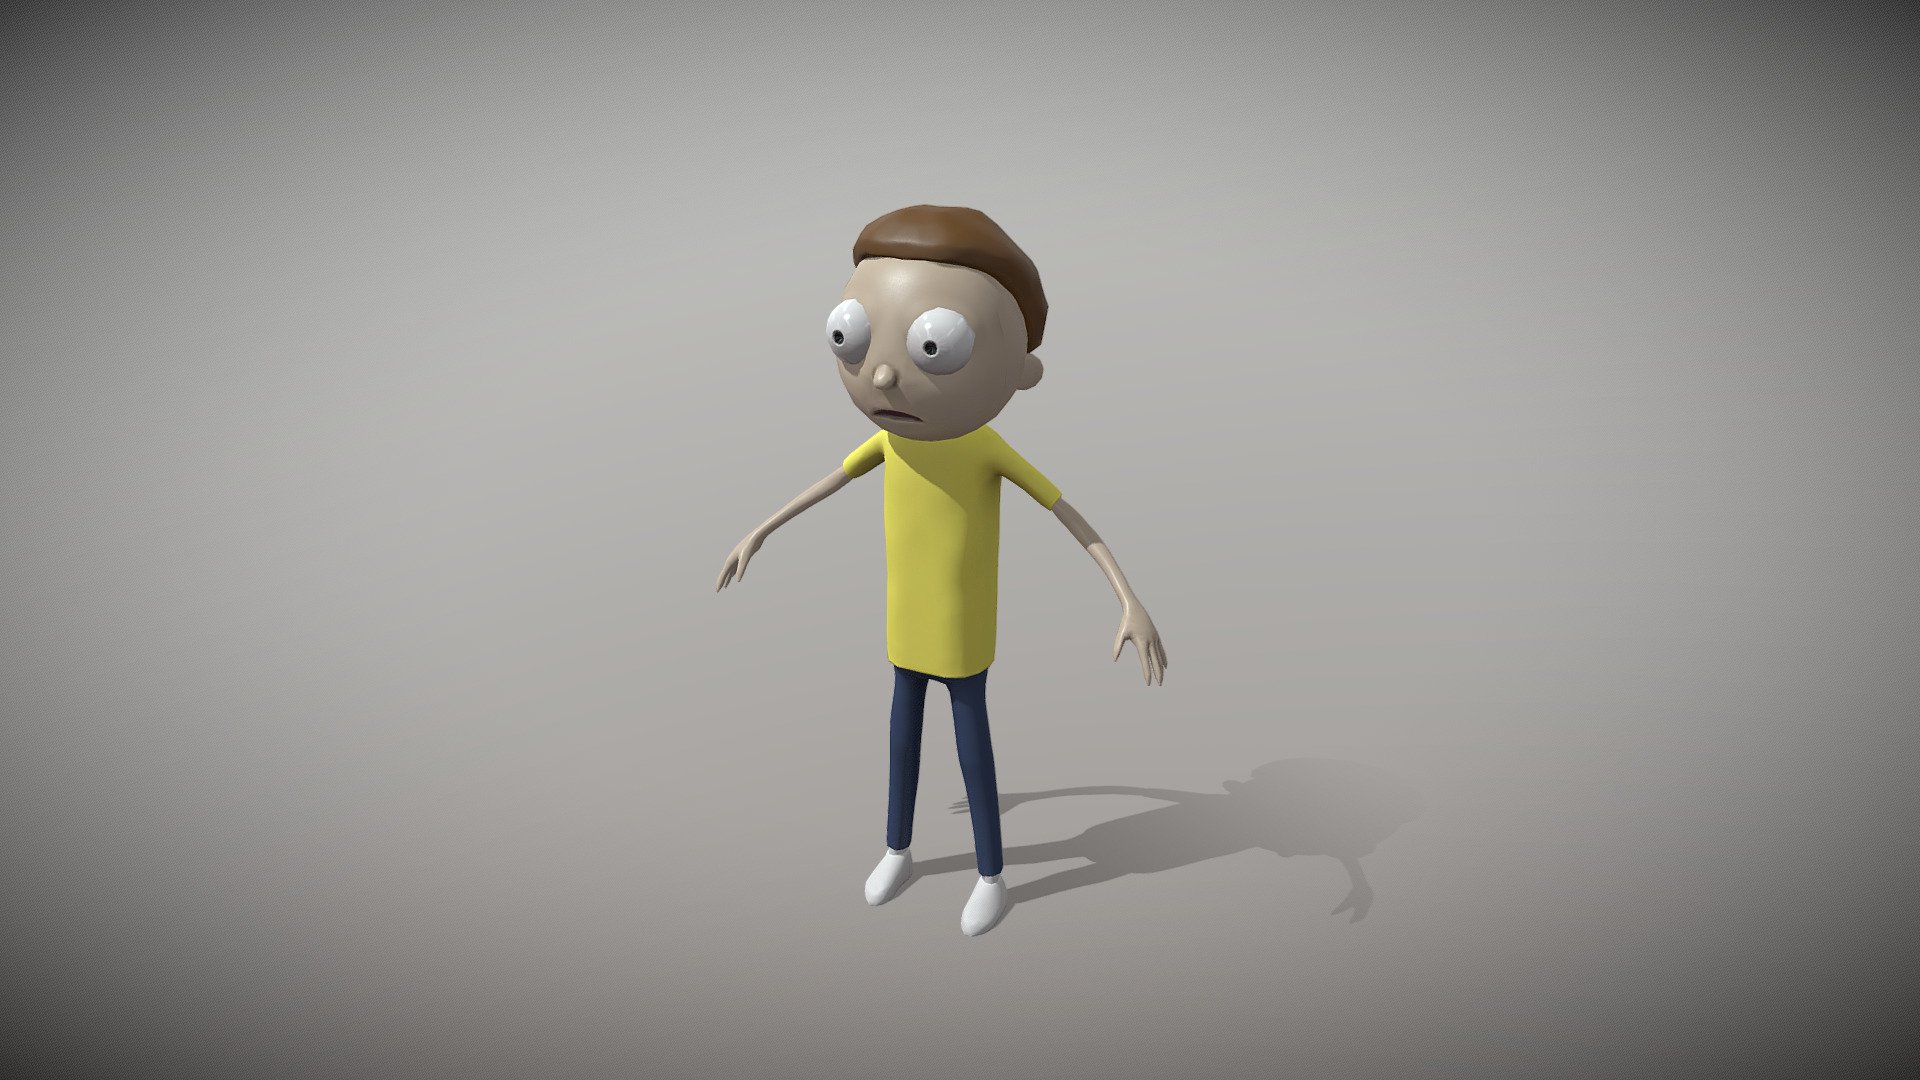 Greetings, my friend. I made Morty from the famous cartoon show and anyone can download it and use it wherever and however they want. Absolutely free, but since I am not the copyright holder of the IP, so I do not advise to sell them, and use them purely for your own personal purposes.
How the character looks in UE4 you can see here: https://youtu.be/VvpsSVWk-LY

Write your thoughts about this model in the comments. Cheerz 
P.S.: I’d be happy if you’d point the link here 3d model